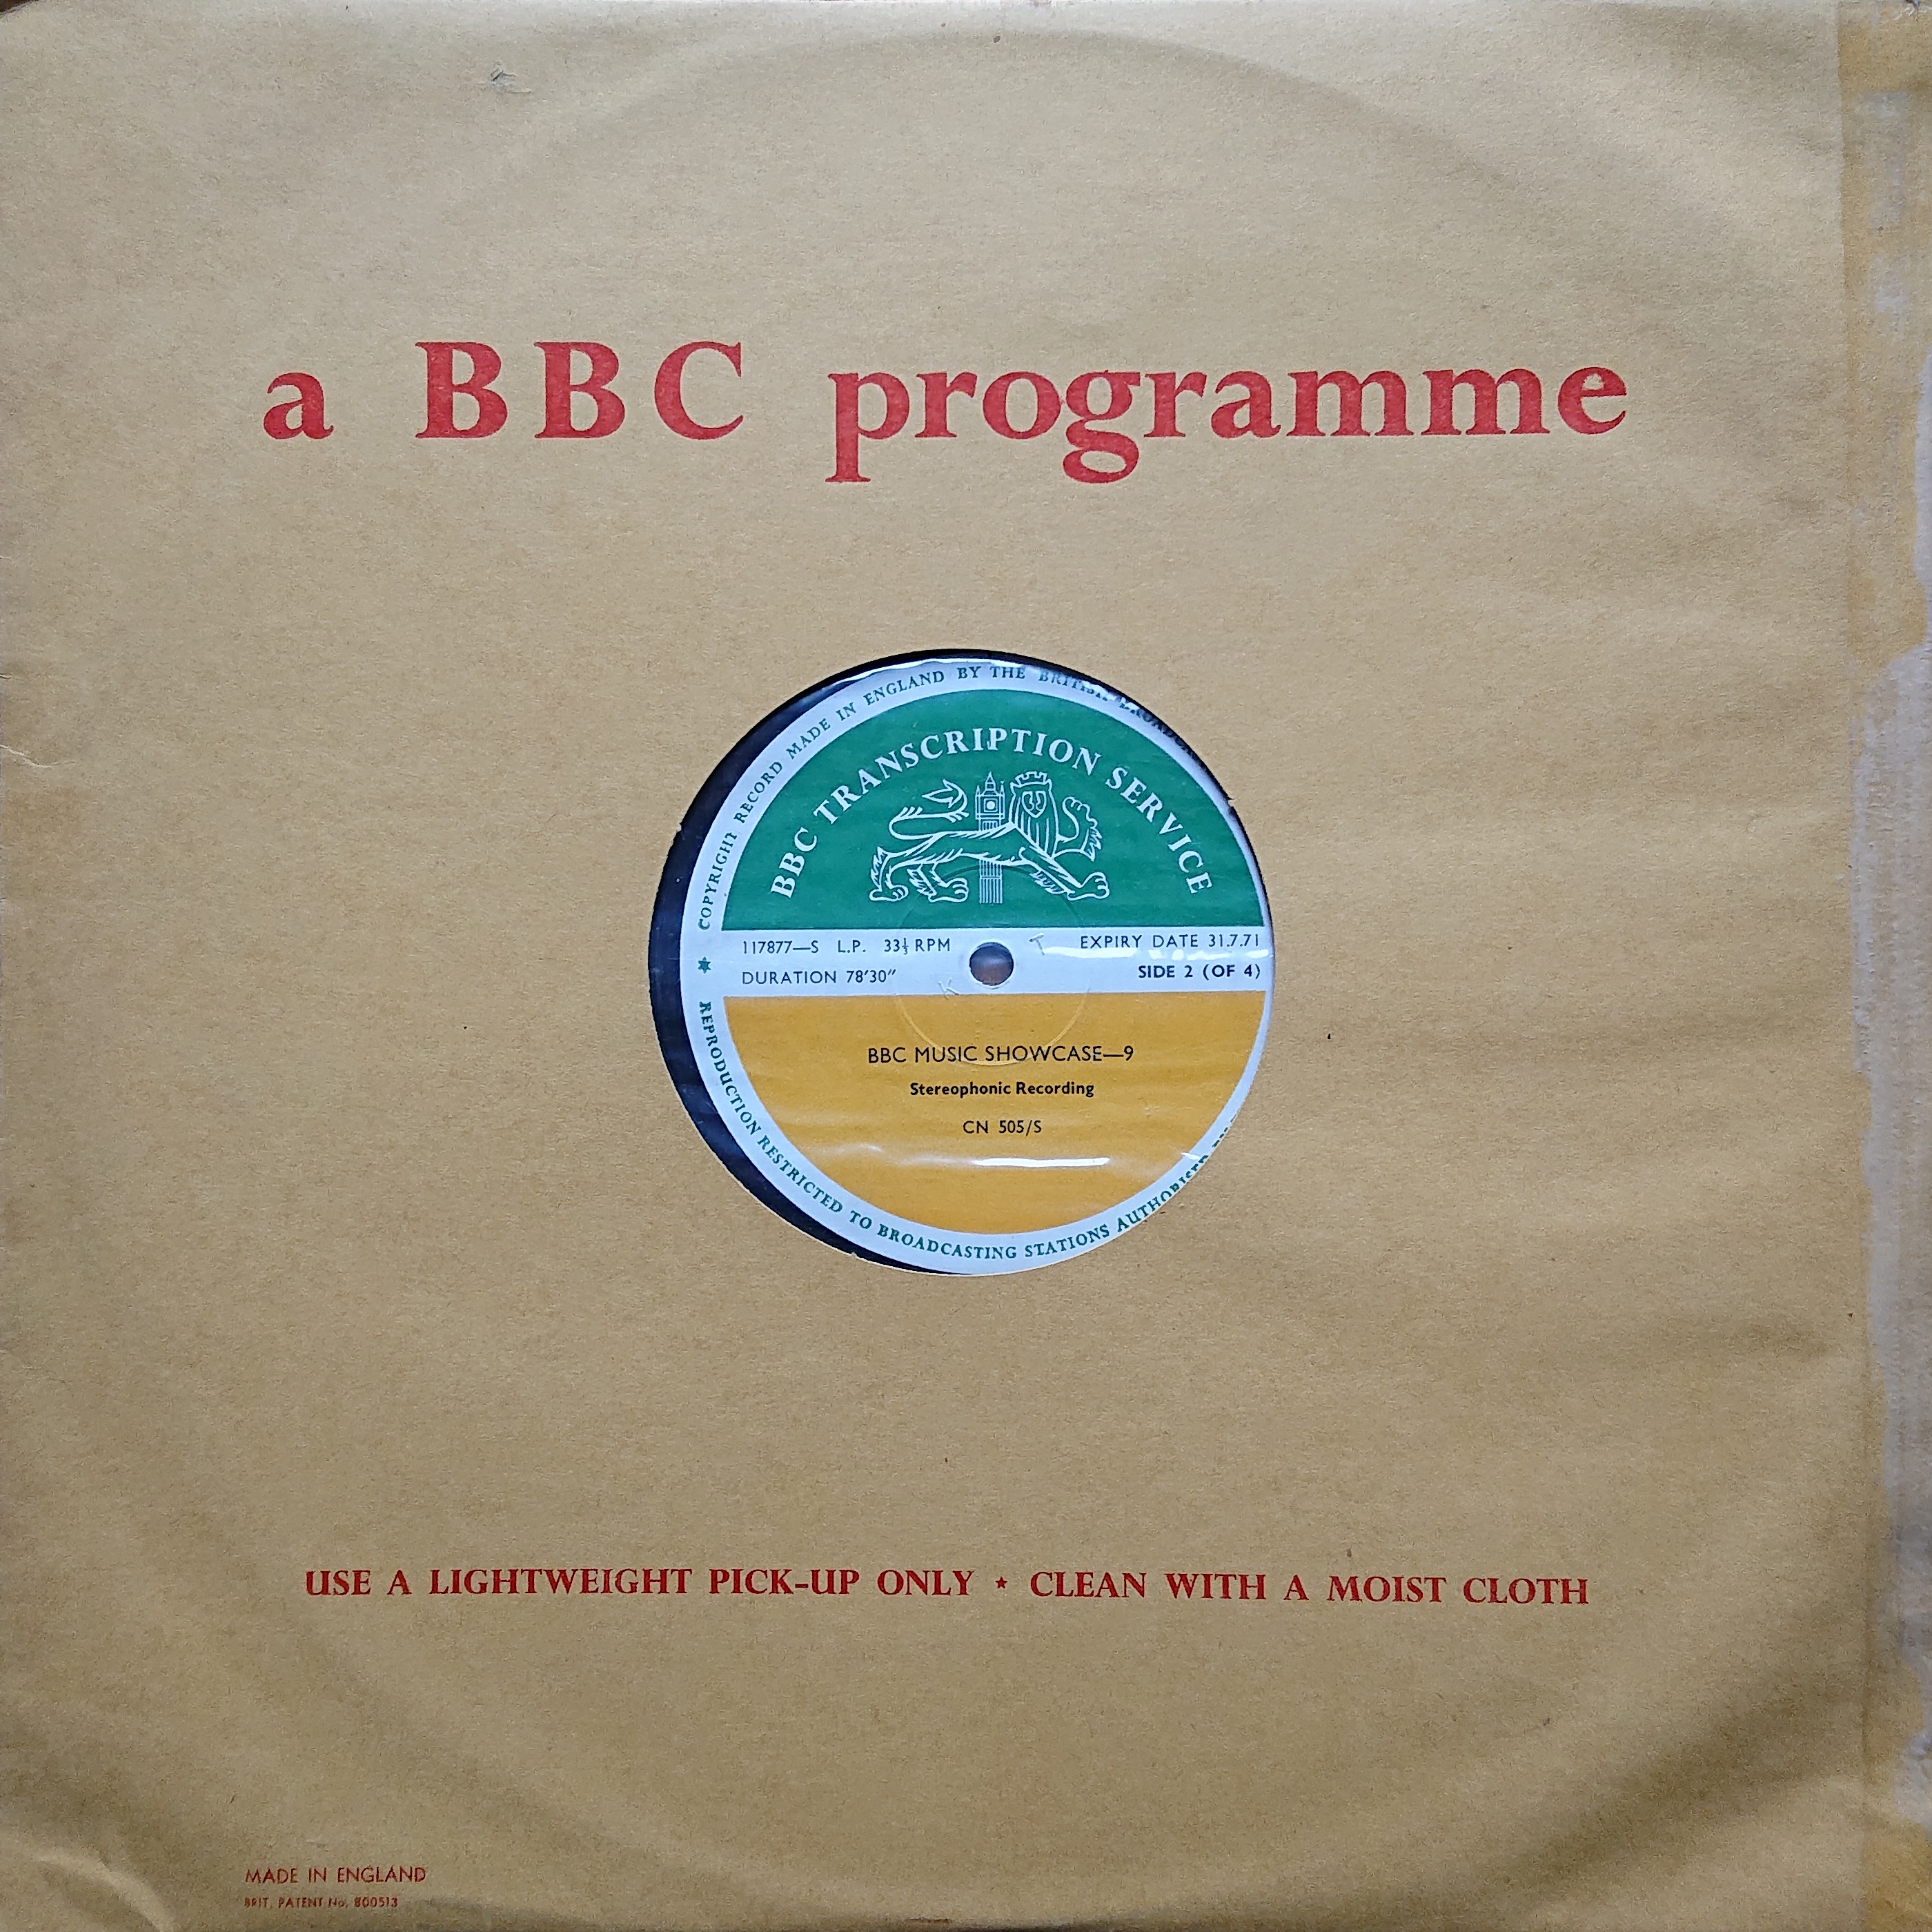 Picture of CN 505 S 18 BBC music showcase - 9 (Sides 2 & 4) by artist Various from the BBC albums - Records and Tapes library